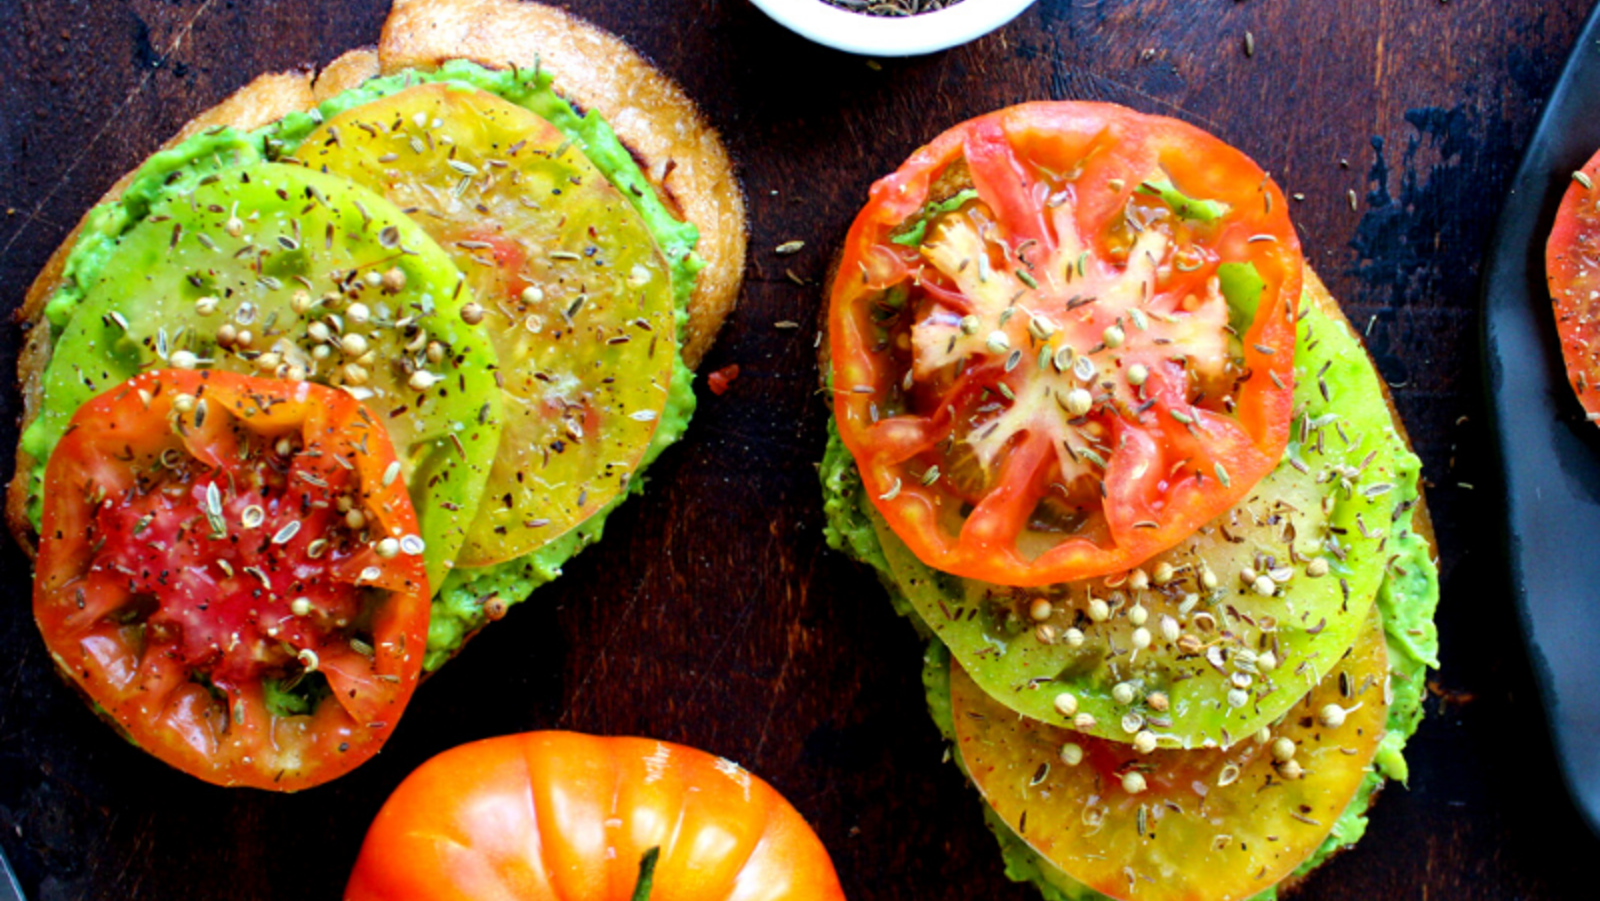 Image of Avocado Toast with Heirloom Tomatoes and Toasted Spices